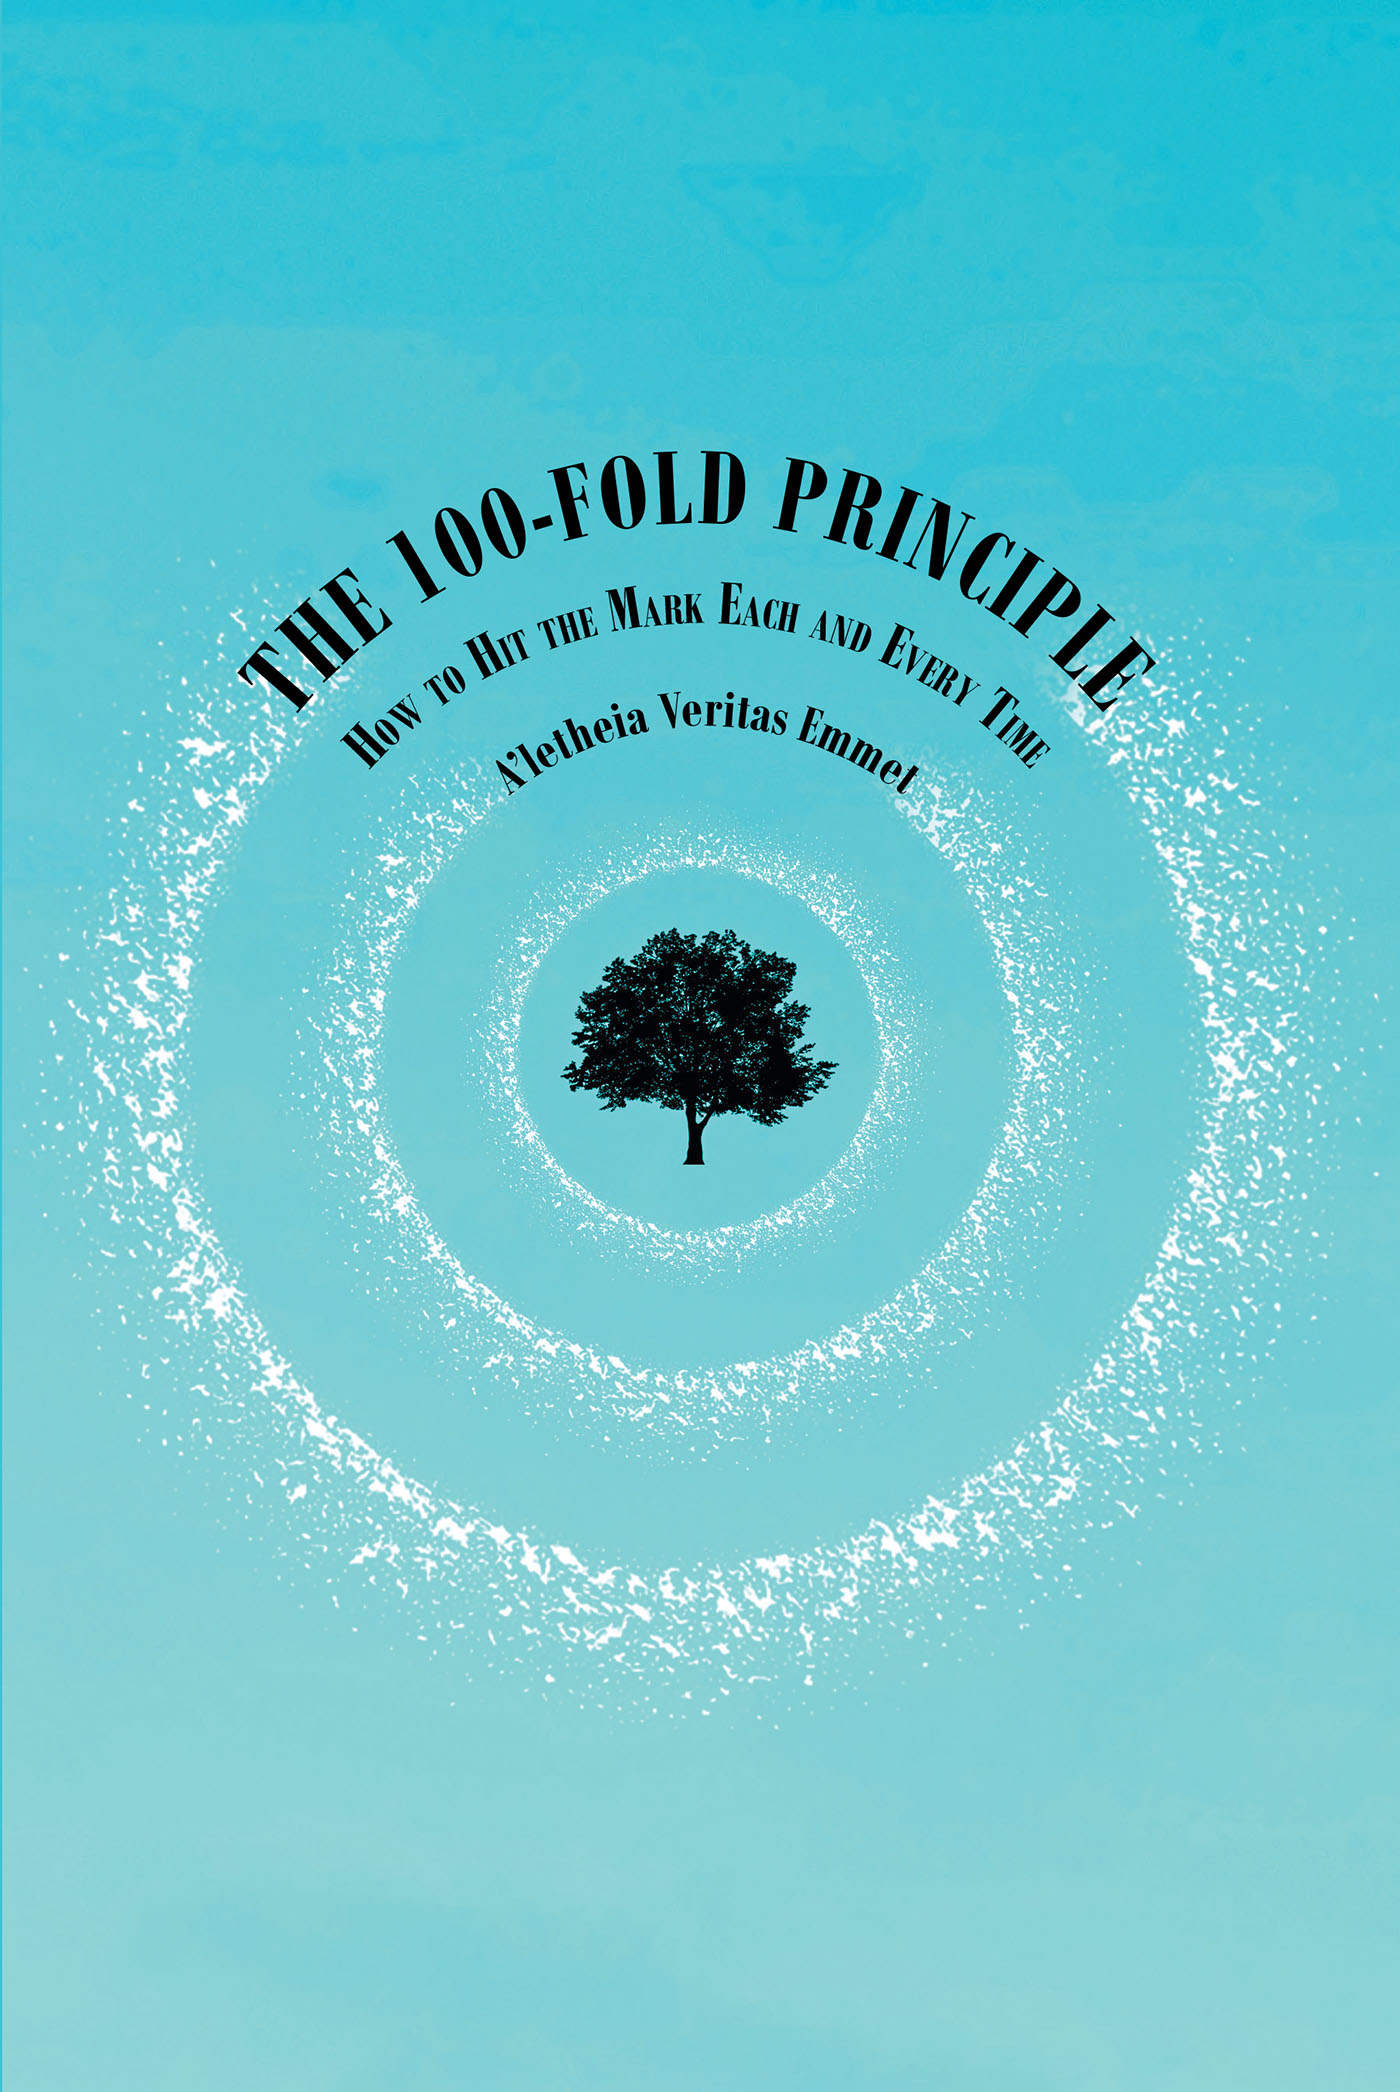 A’letheia Veritas Emmet’s Newly Released “The 100-Fold Principle: How to Hit the Mark Each and Every Time” is a Thoughtful Discussion of One’s Purpose